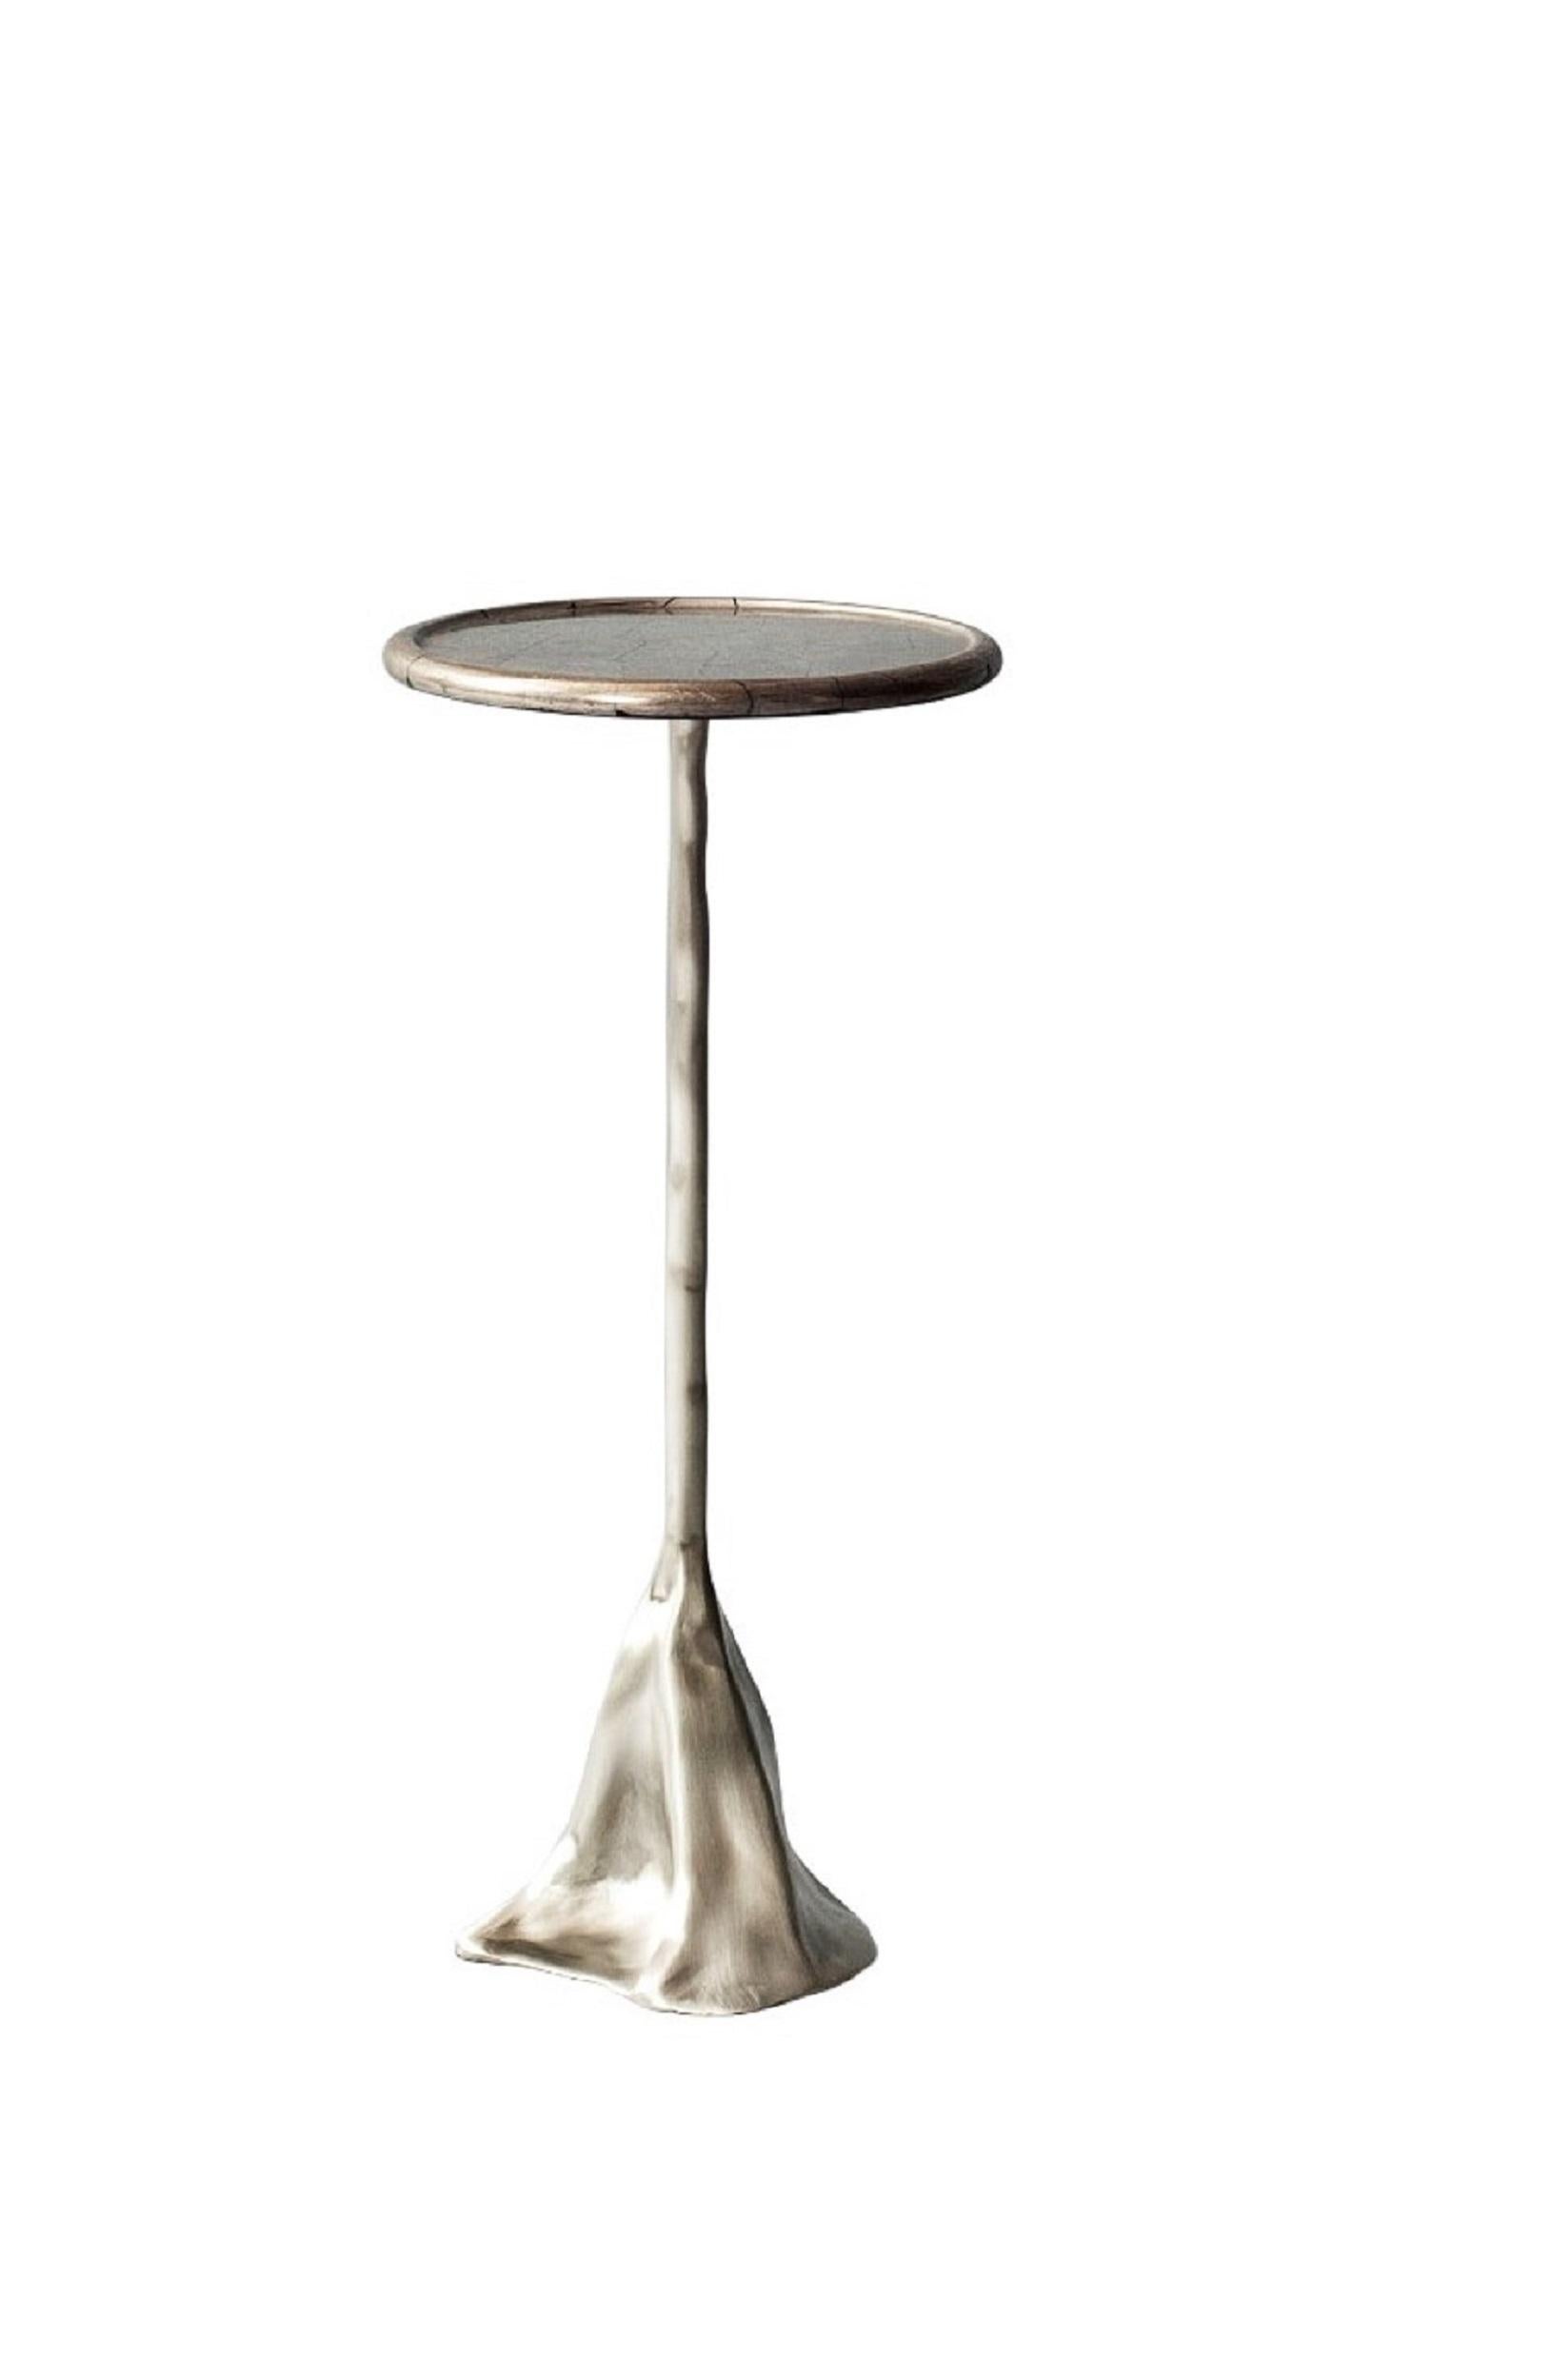 Tana side table by DeMuro Das
Dimensions: 25 x H 55.6 cm
Materials: Pyrite (Silver), polished (Random)
Solid Nickle silver, satin

Dimensions and finishes can be customized.

DeMuro Das is an international design firm and the aesthetic and